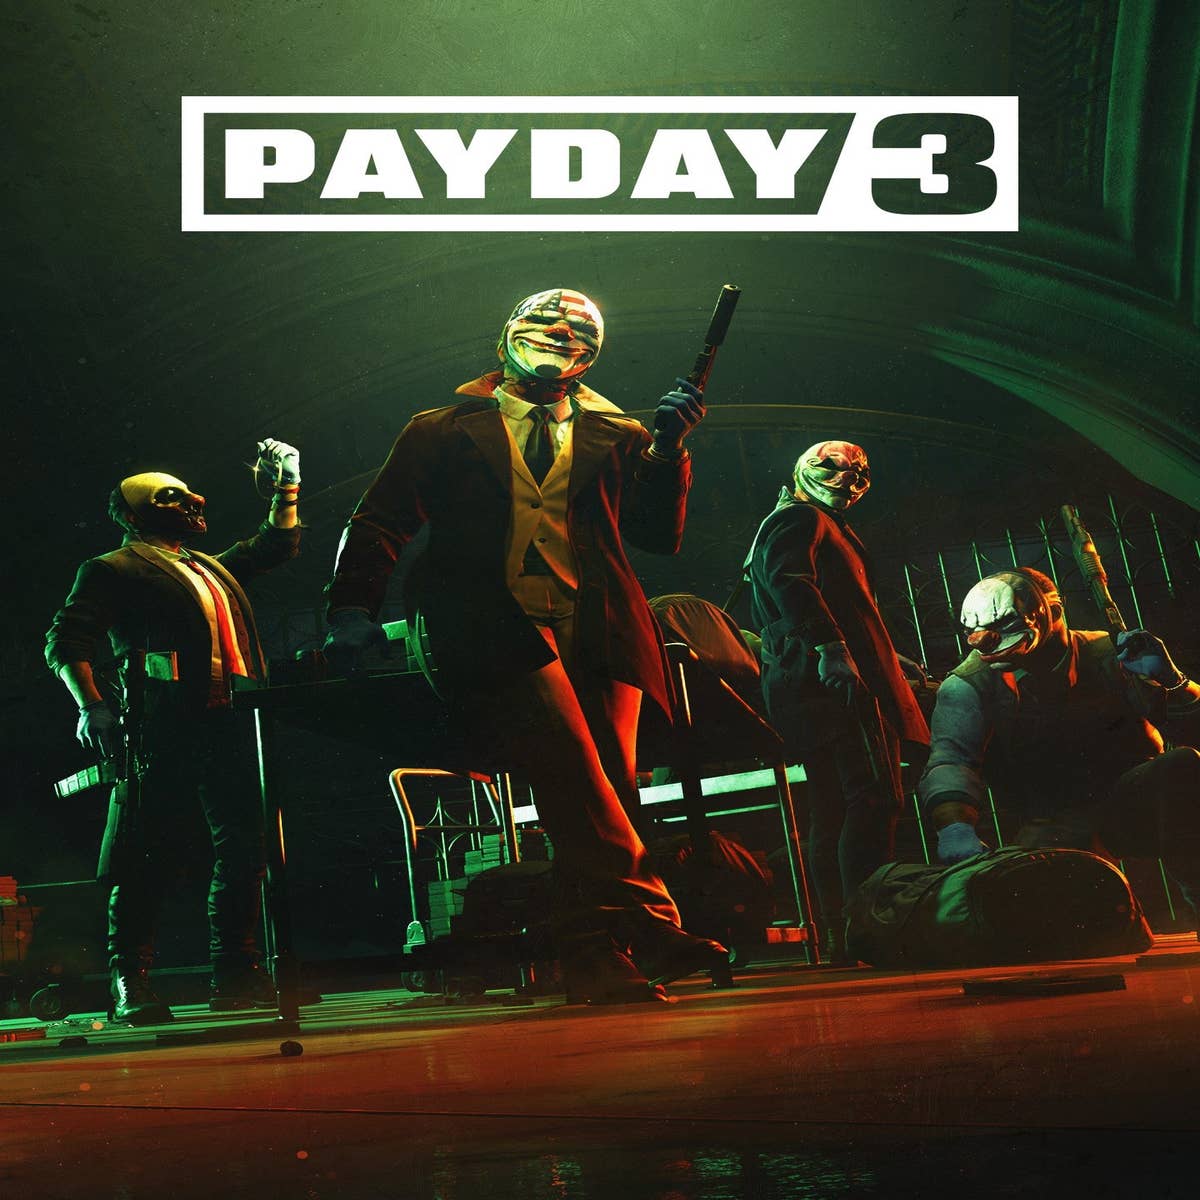 Payday 3 has dropped the anti-piracy system Denuvo